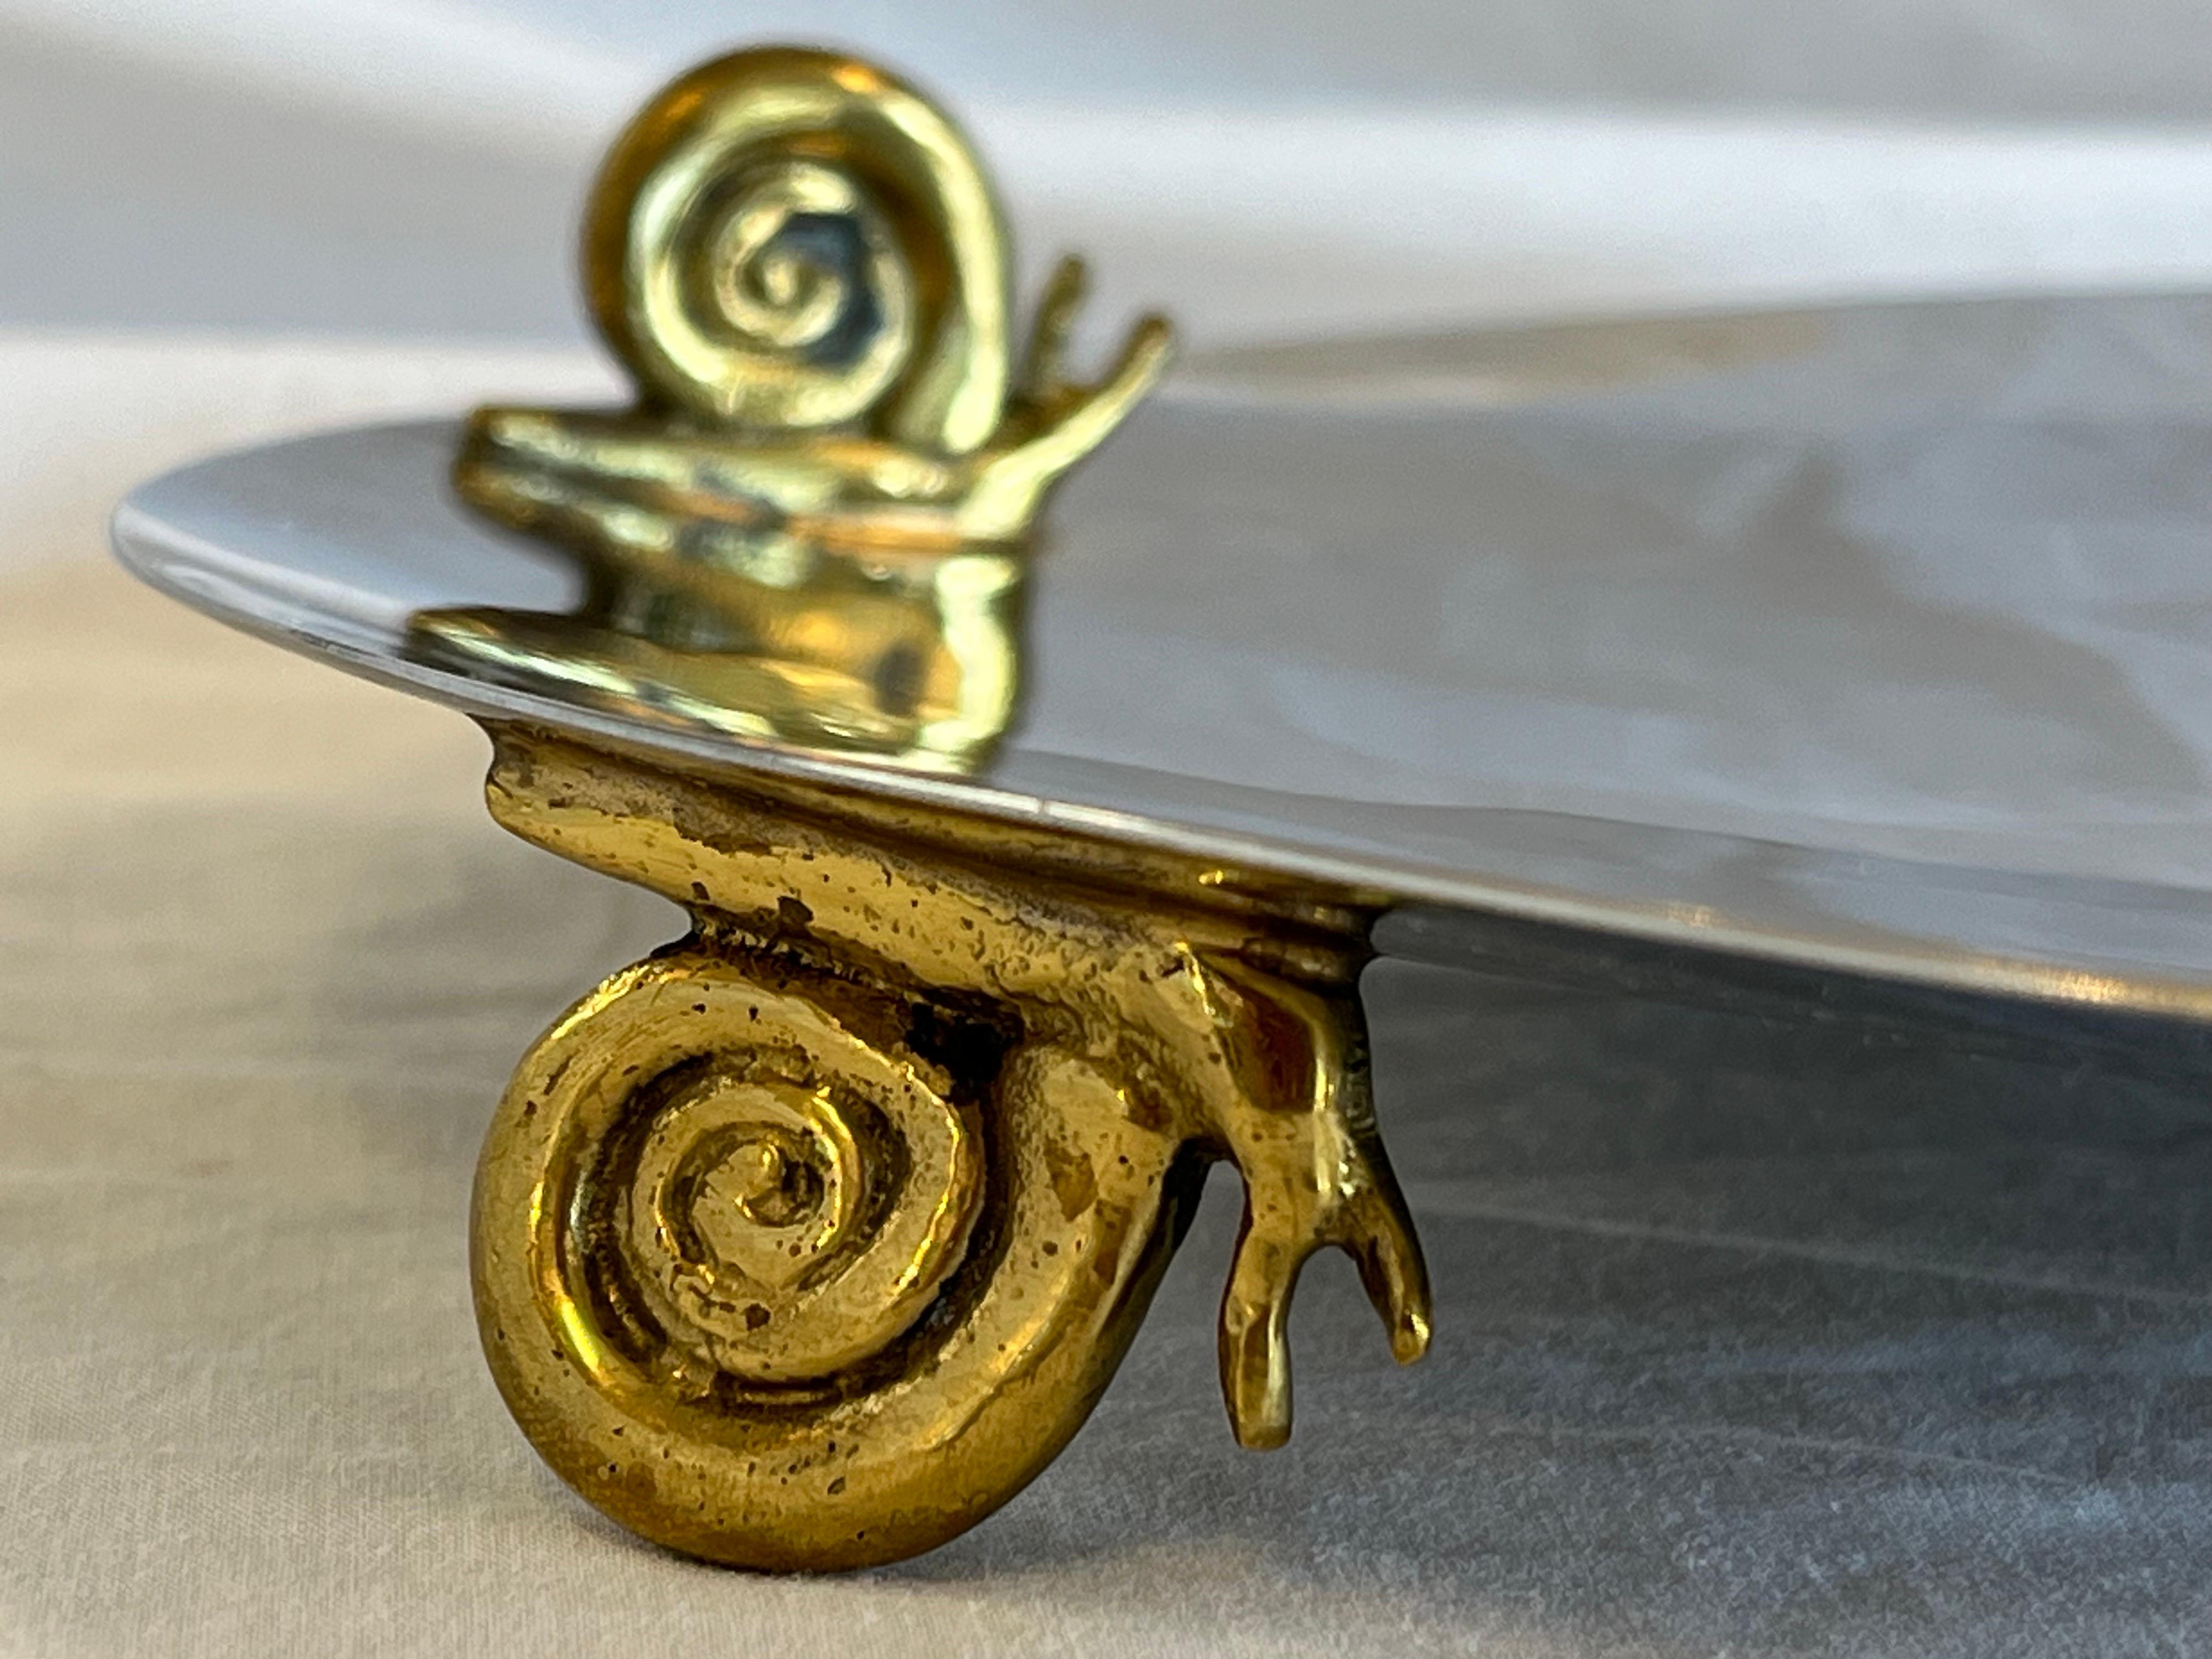 Metal Vintage Michael Aram Stainless Steel and Brass Snail Serving Platter or Tray